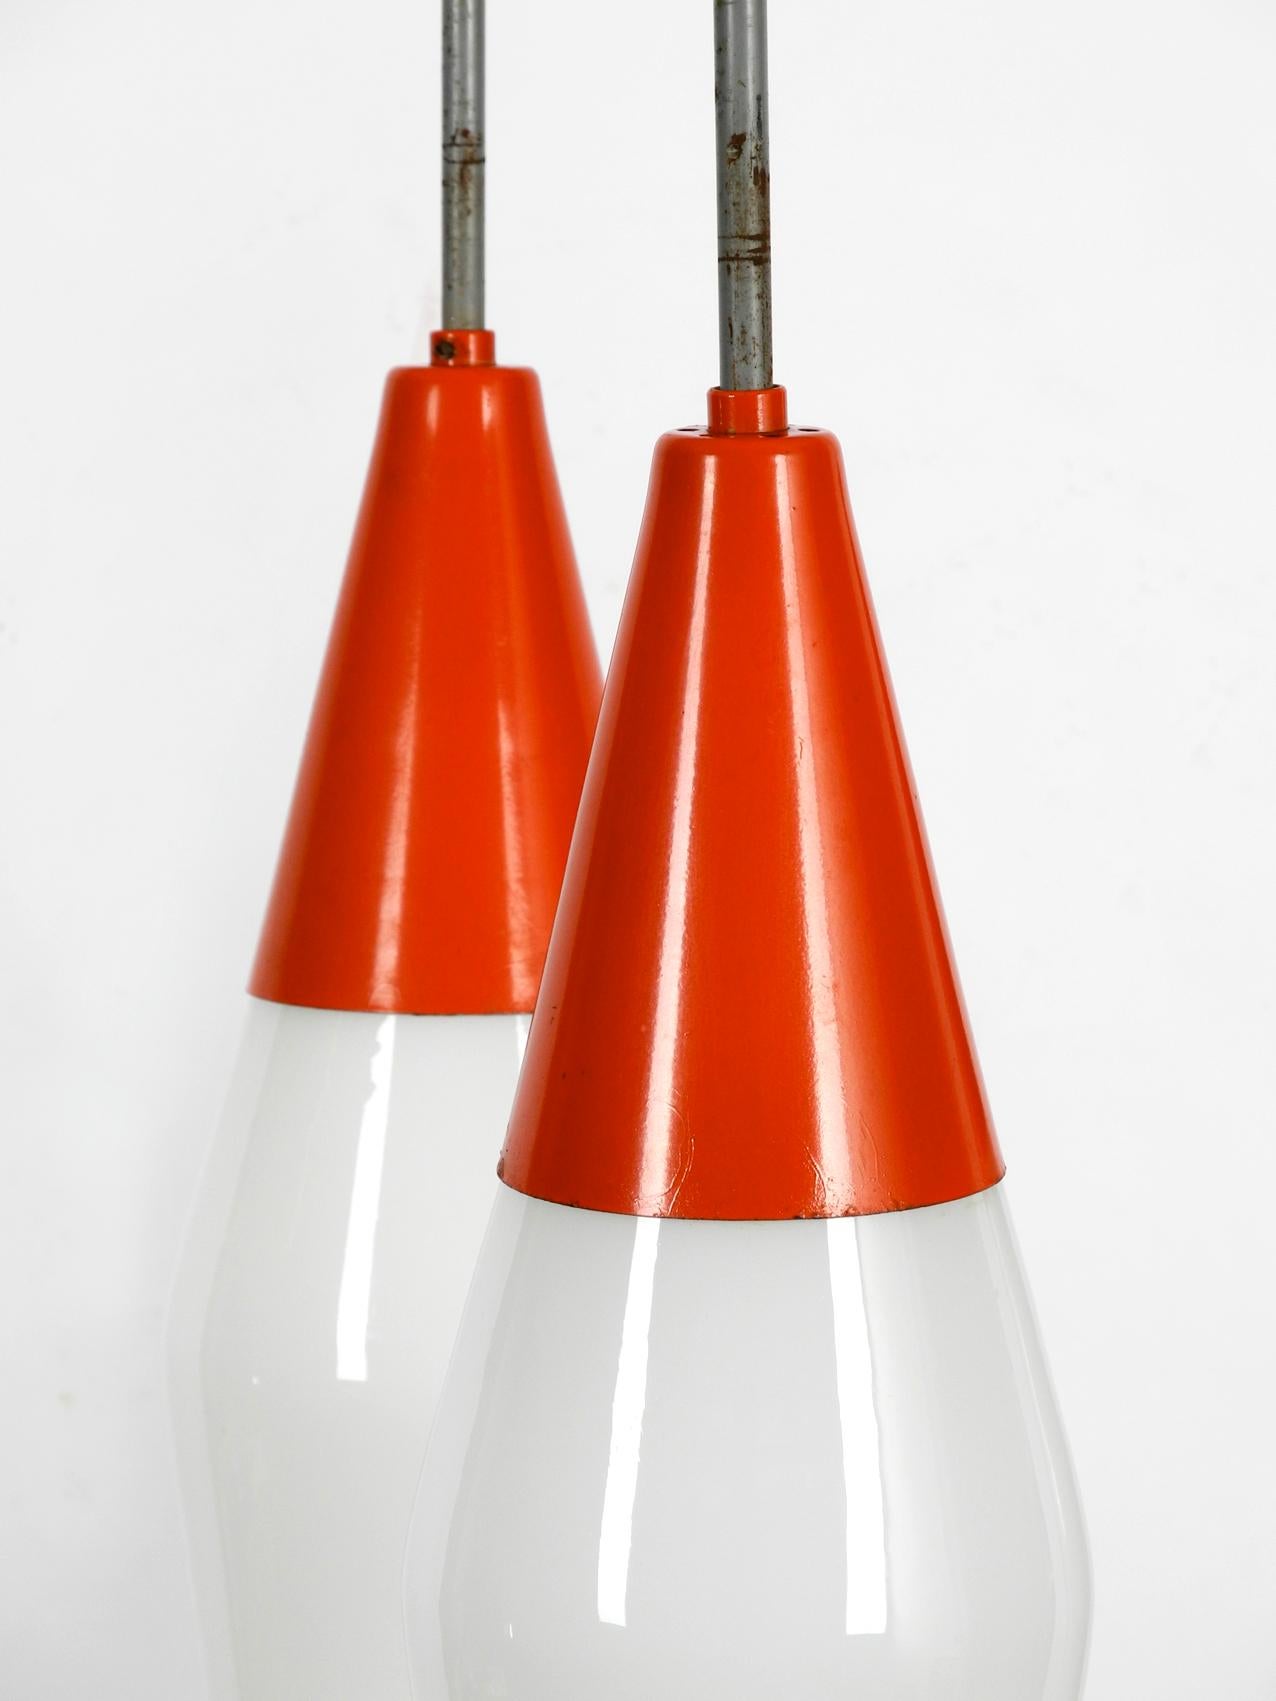 Midcentury Industrial Metal and Glass Ceiling Light by Josef Hurka for Napako For Sale 1